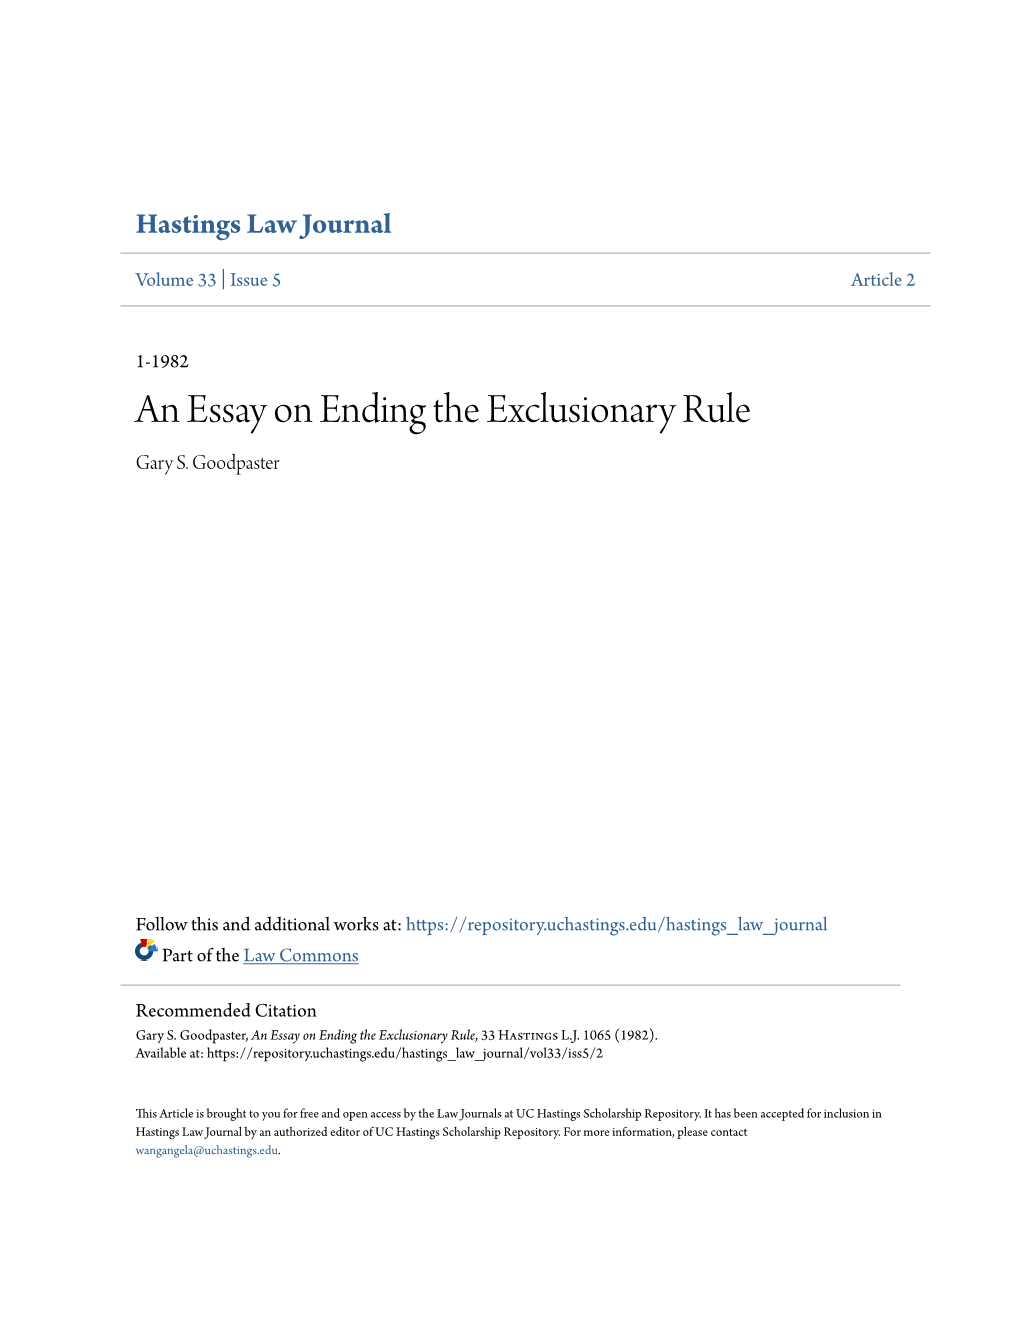 An Essay on Ending the Exclusionary Rule Gary S